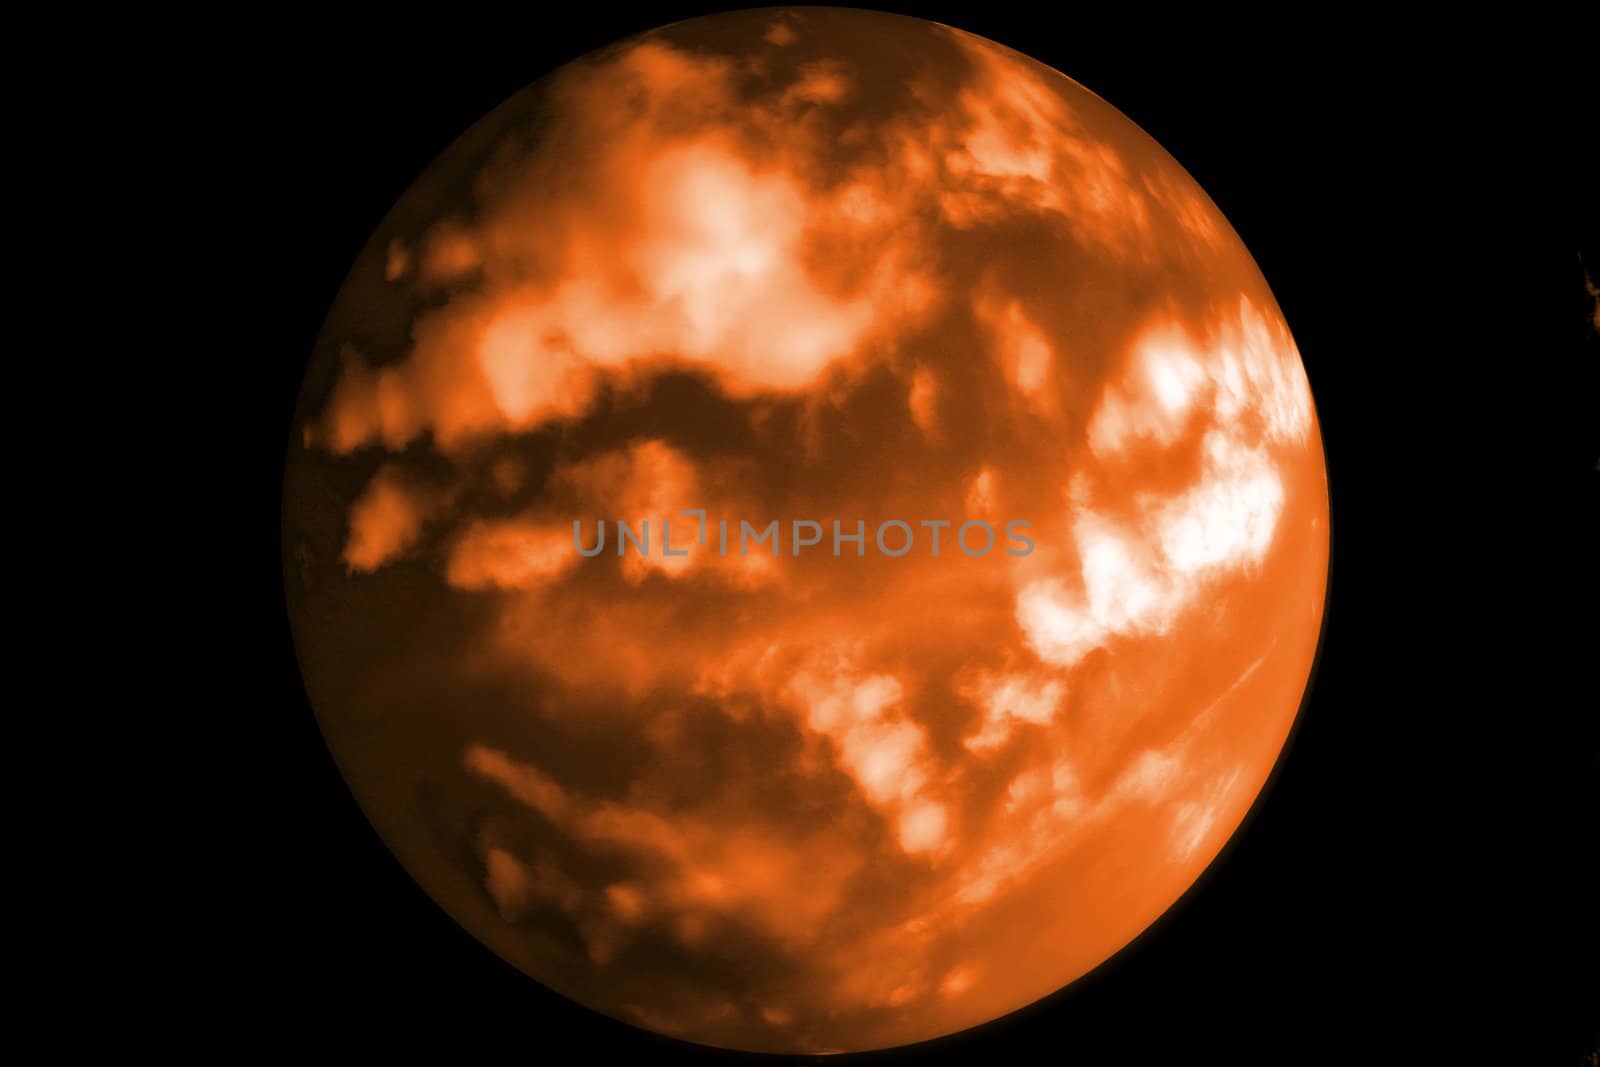 blurry planet with clouds and the look of being on fire